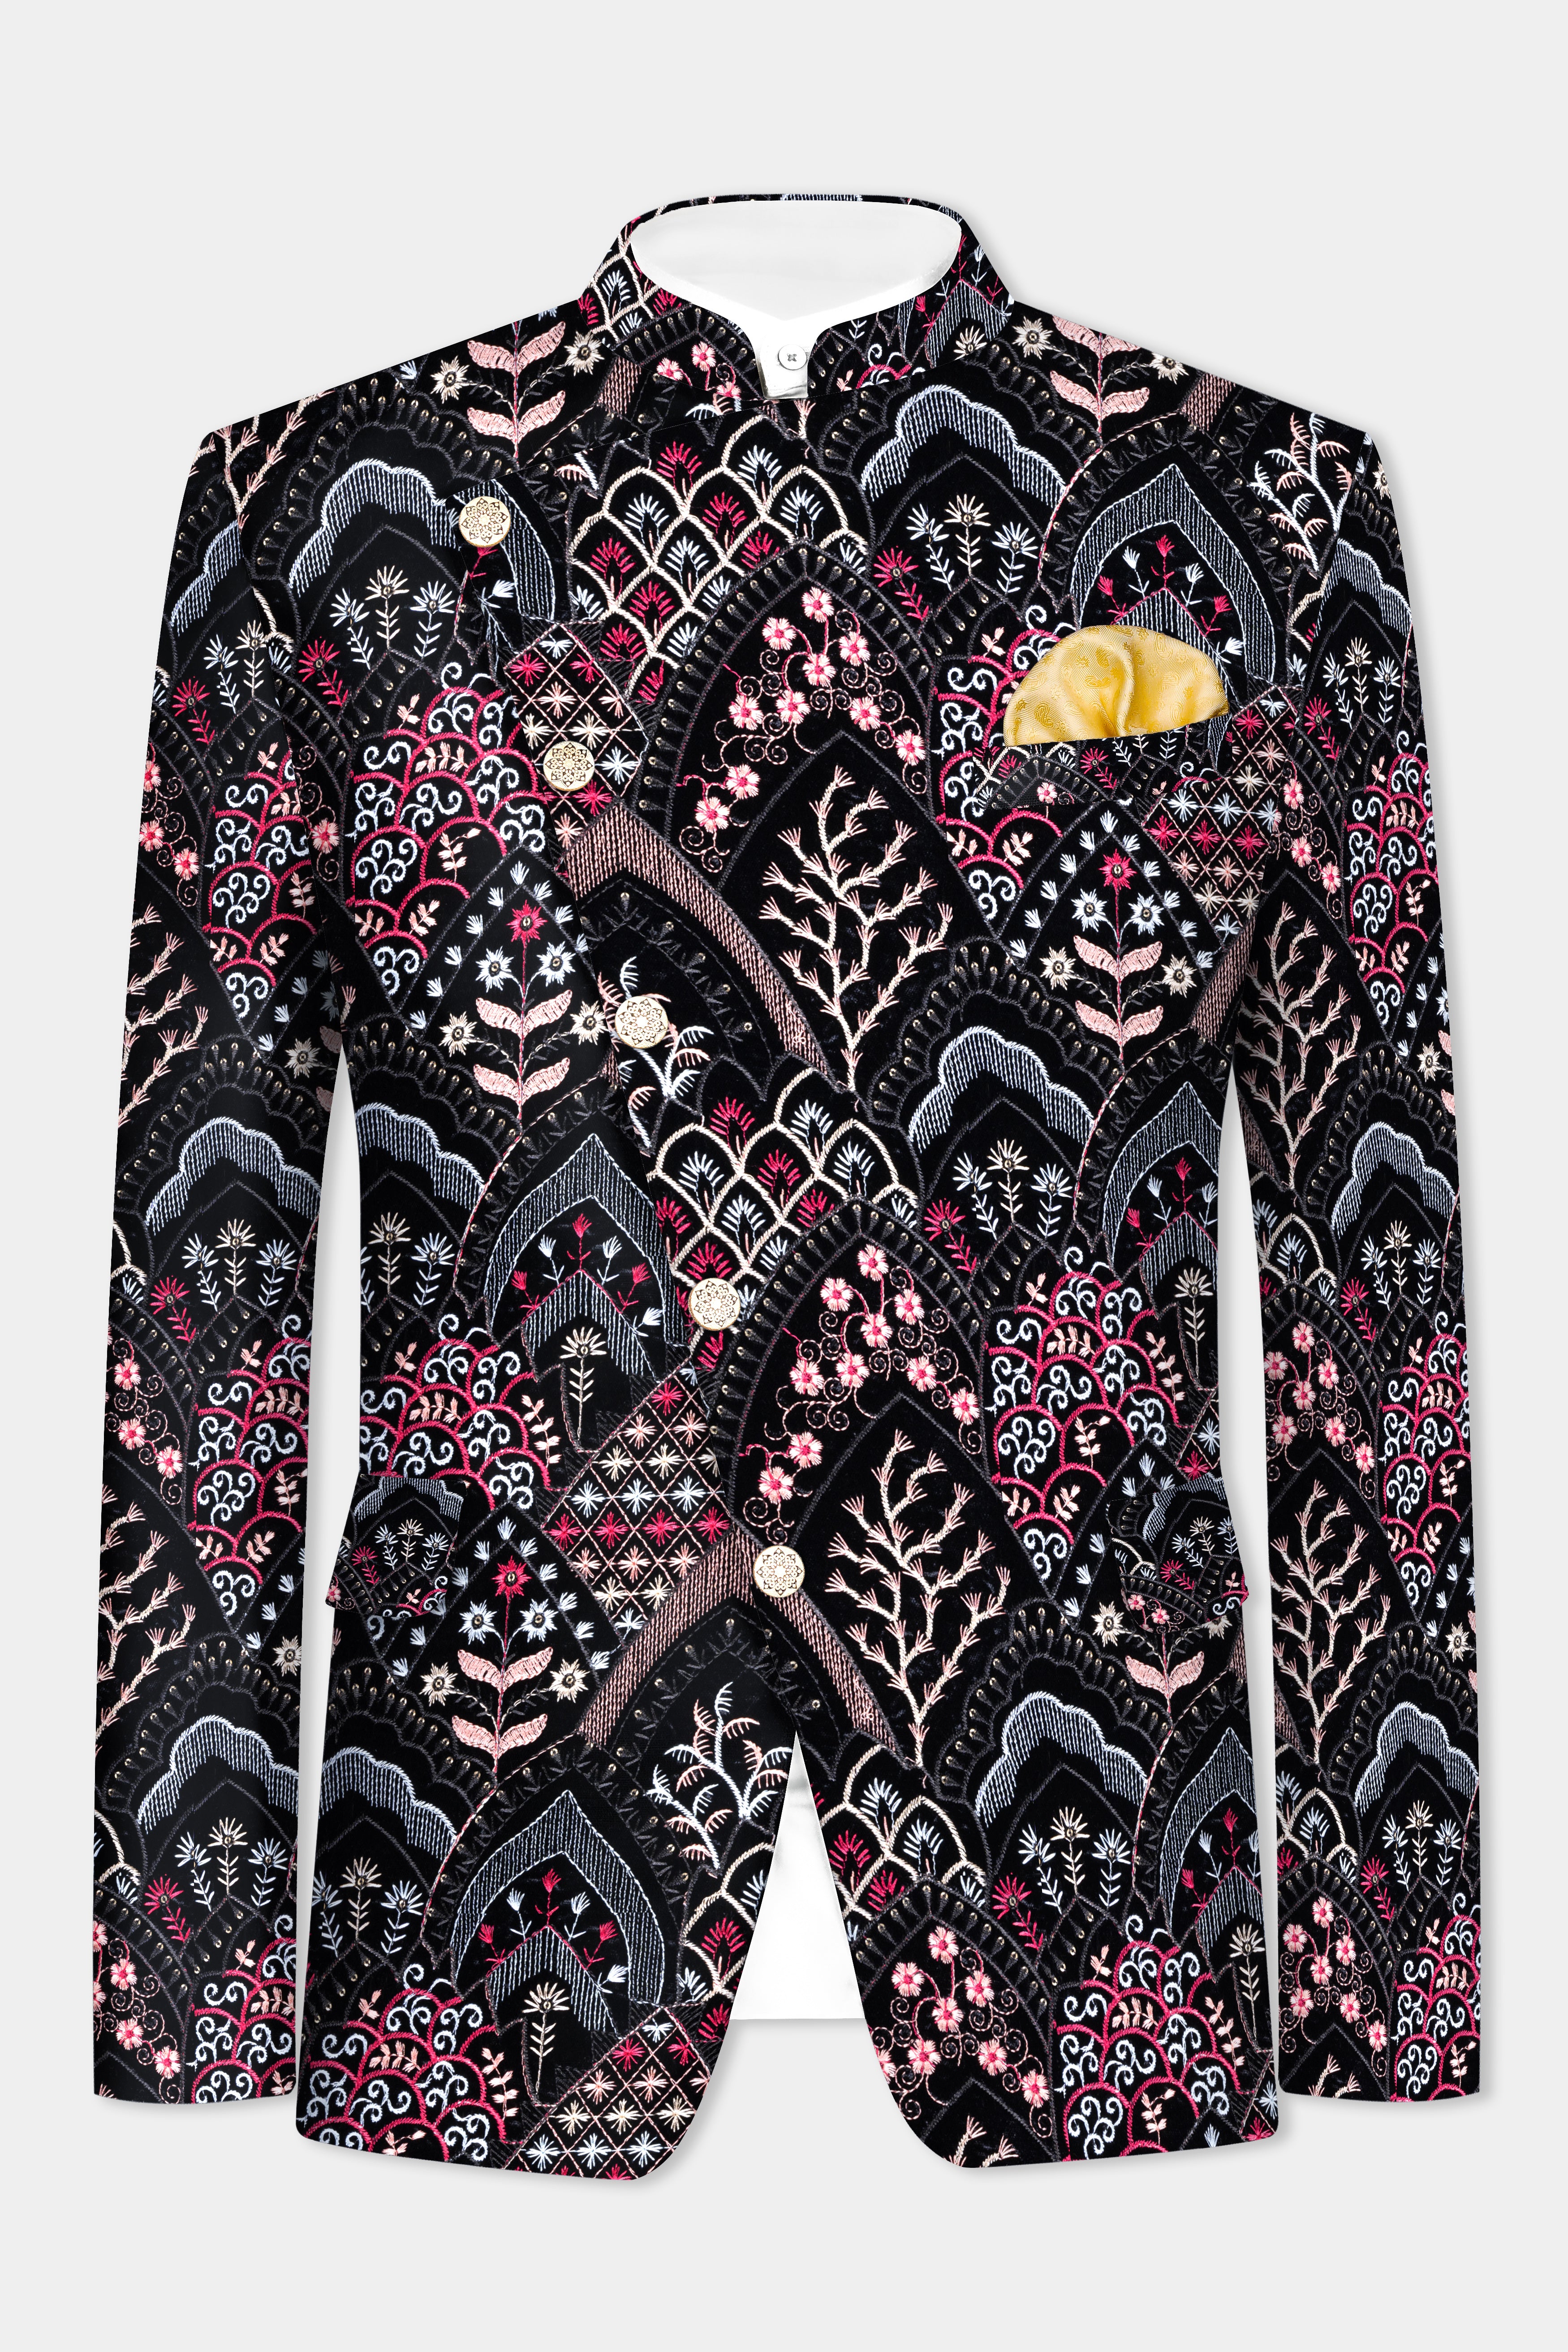 Jade Black with Tyrian Pink and Opium Brown Multicolour Floral Embroidered Cross Buttoned Bandhgala Jodhpuri BL3488-CBG-36, BL3488-CBG-38, BL3488-CBG-40, BL3488-CBG-42, BL3488-CBG-44, BL3488-CBG-46, BL3488-CBG-48, BL3488-CBG-50, BL3488-CBG-52, BL3488-CBG-54, BL3488-CBG-56, BL3488-CBG-58, BL3488-CBG-60